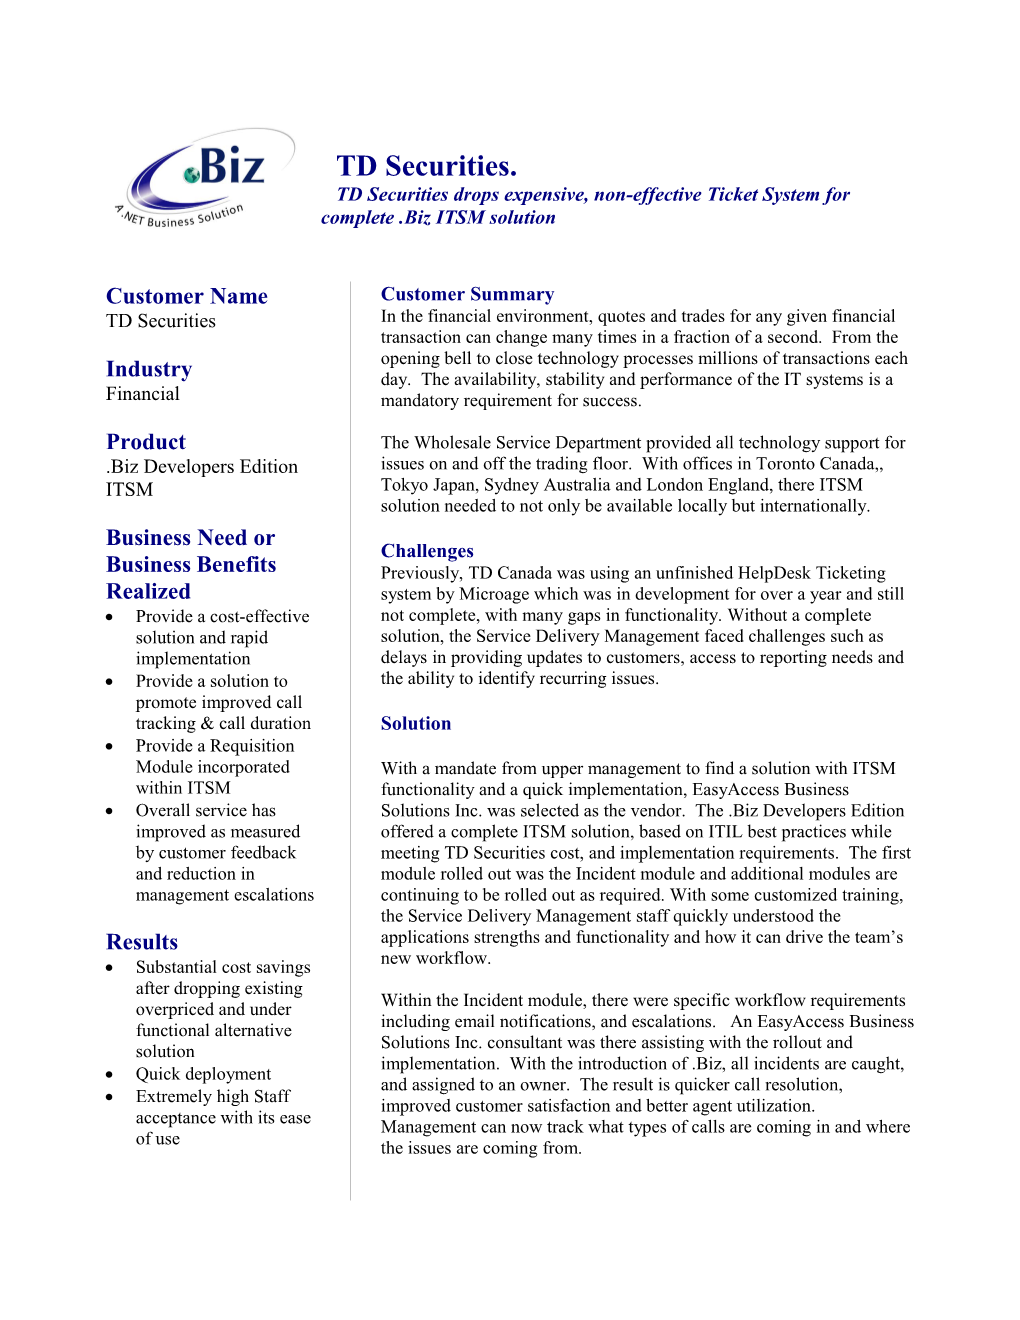 TD Securities Drops Expensive, Non-Effective Ticket System for Complete .Biz ITSM Solution